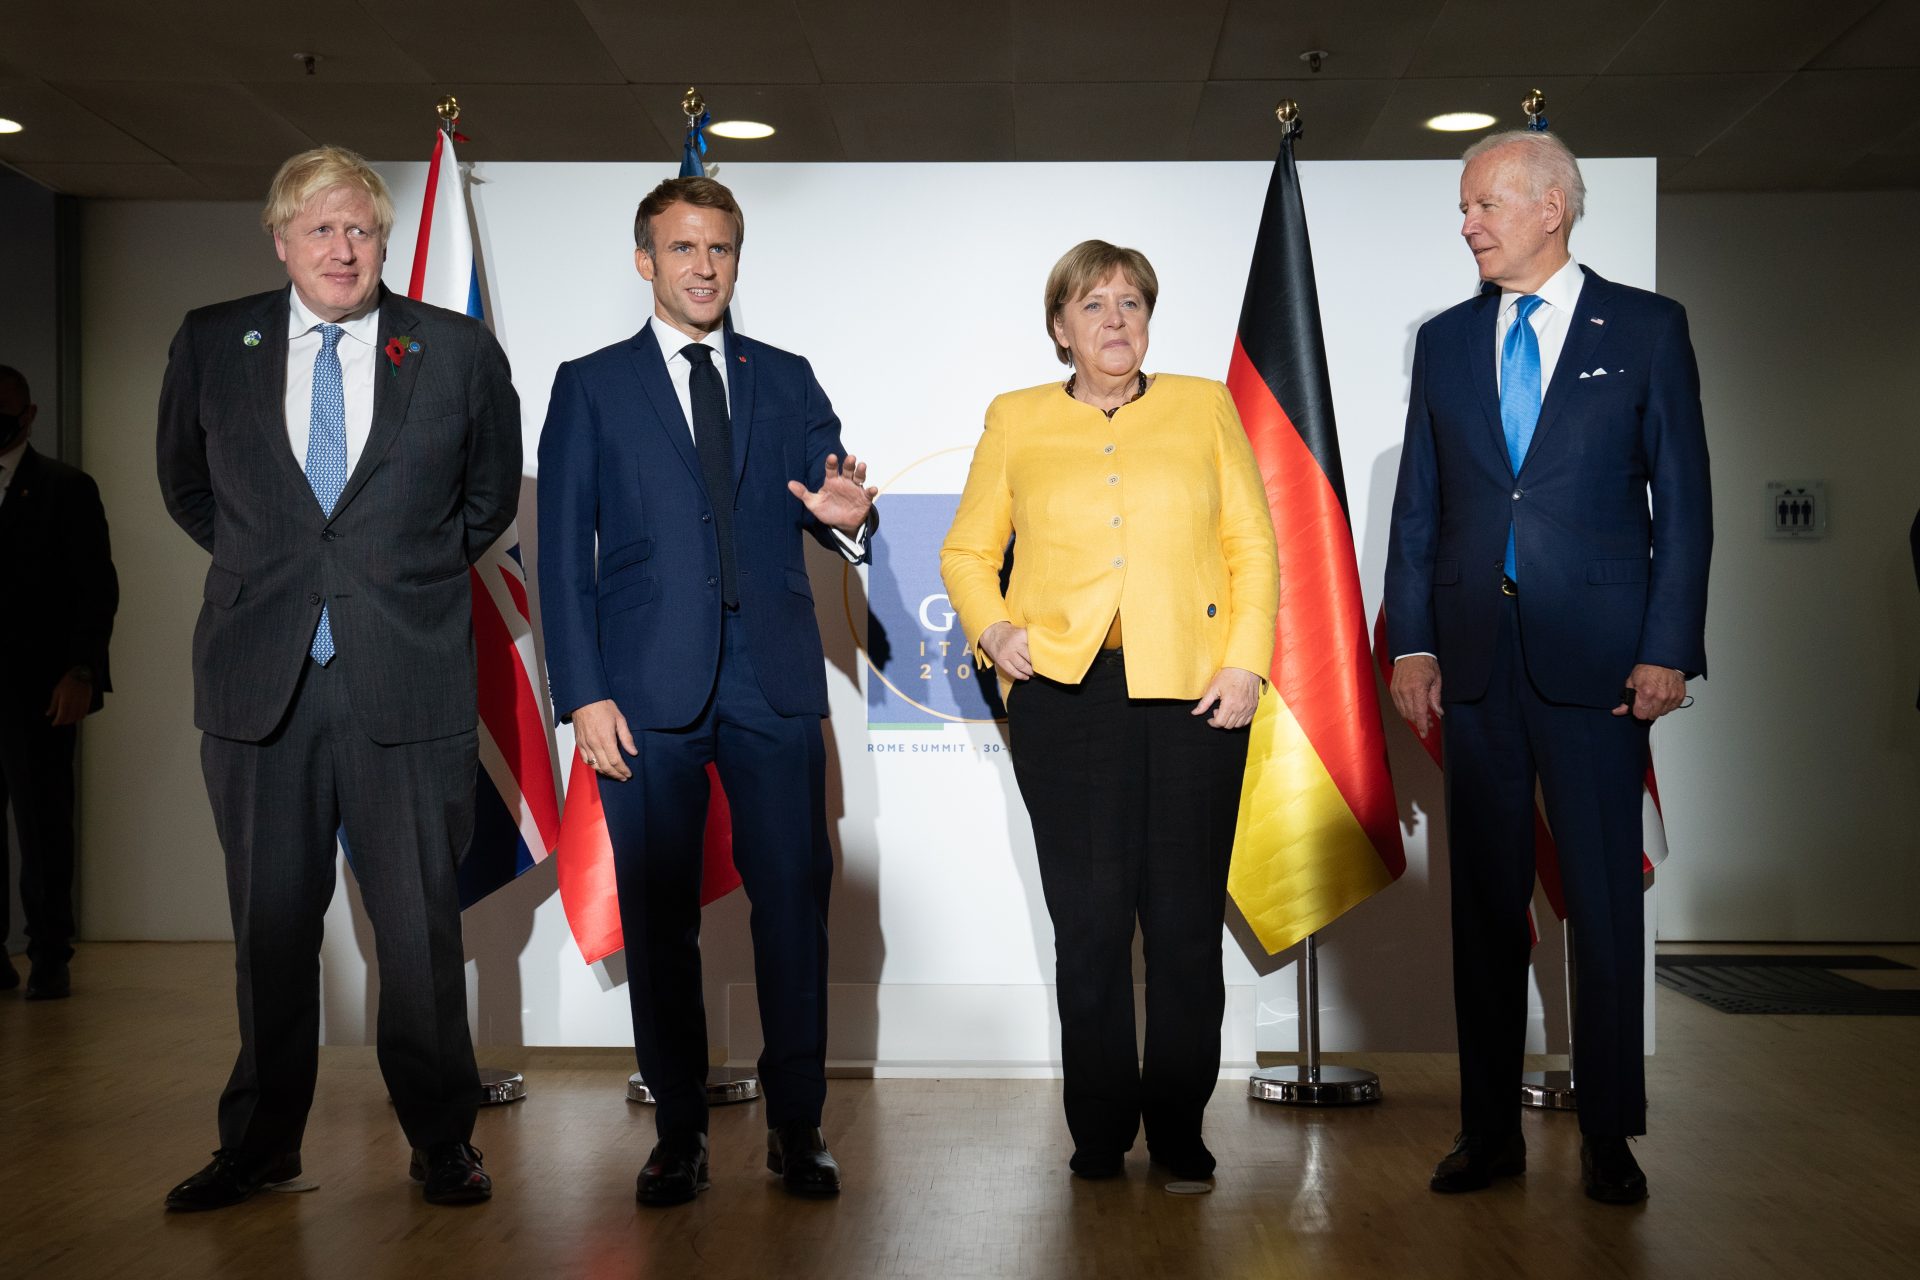 British Prime Minister Boris Johnson, French President Emmanuel Macron, German Chancellor Angela Merkel, and U.S. President Joe Biden at a meeting at the La Nuvola conference center for the G20 summit in Rome, Italy. Photograph: Getty Images.